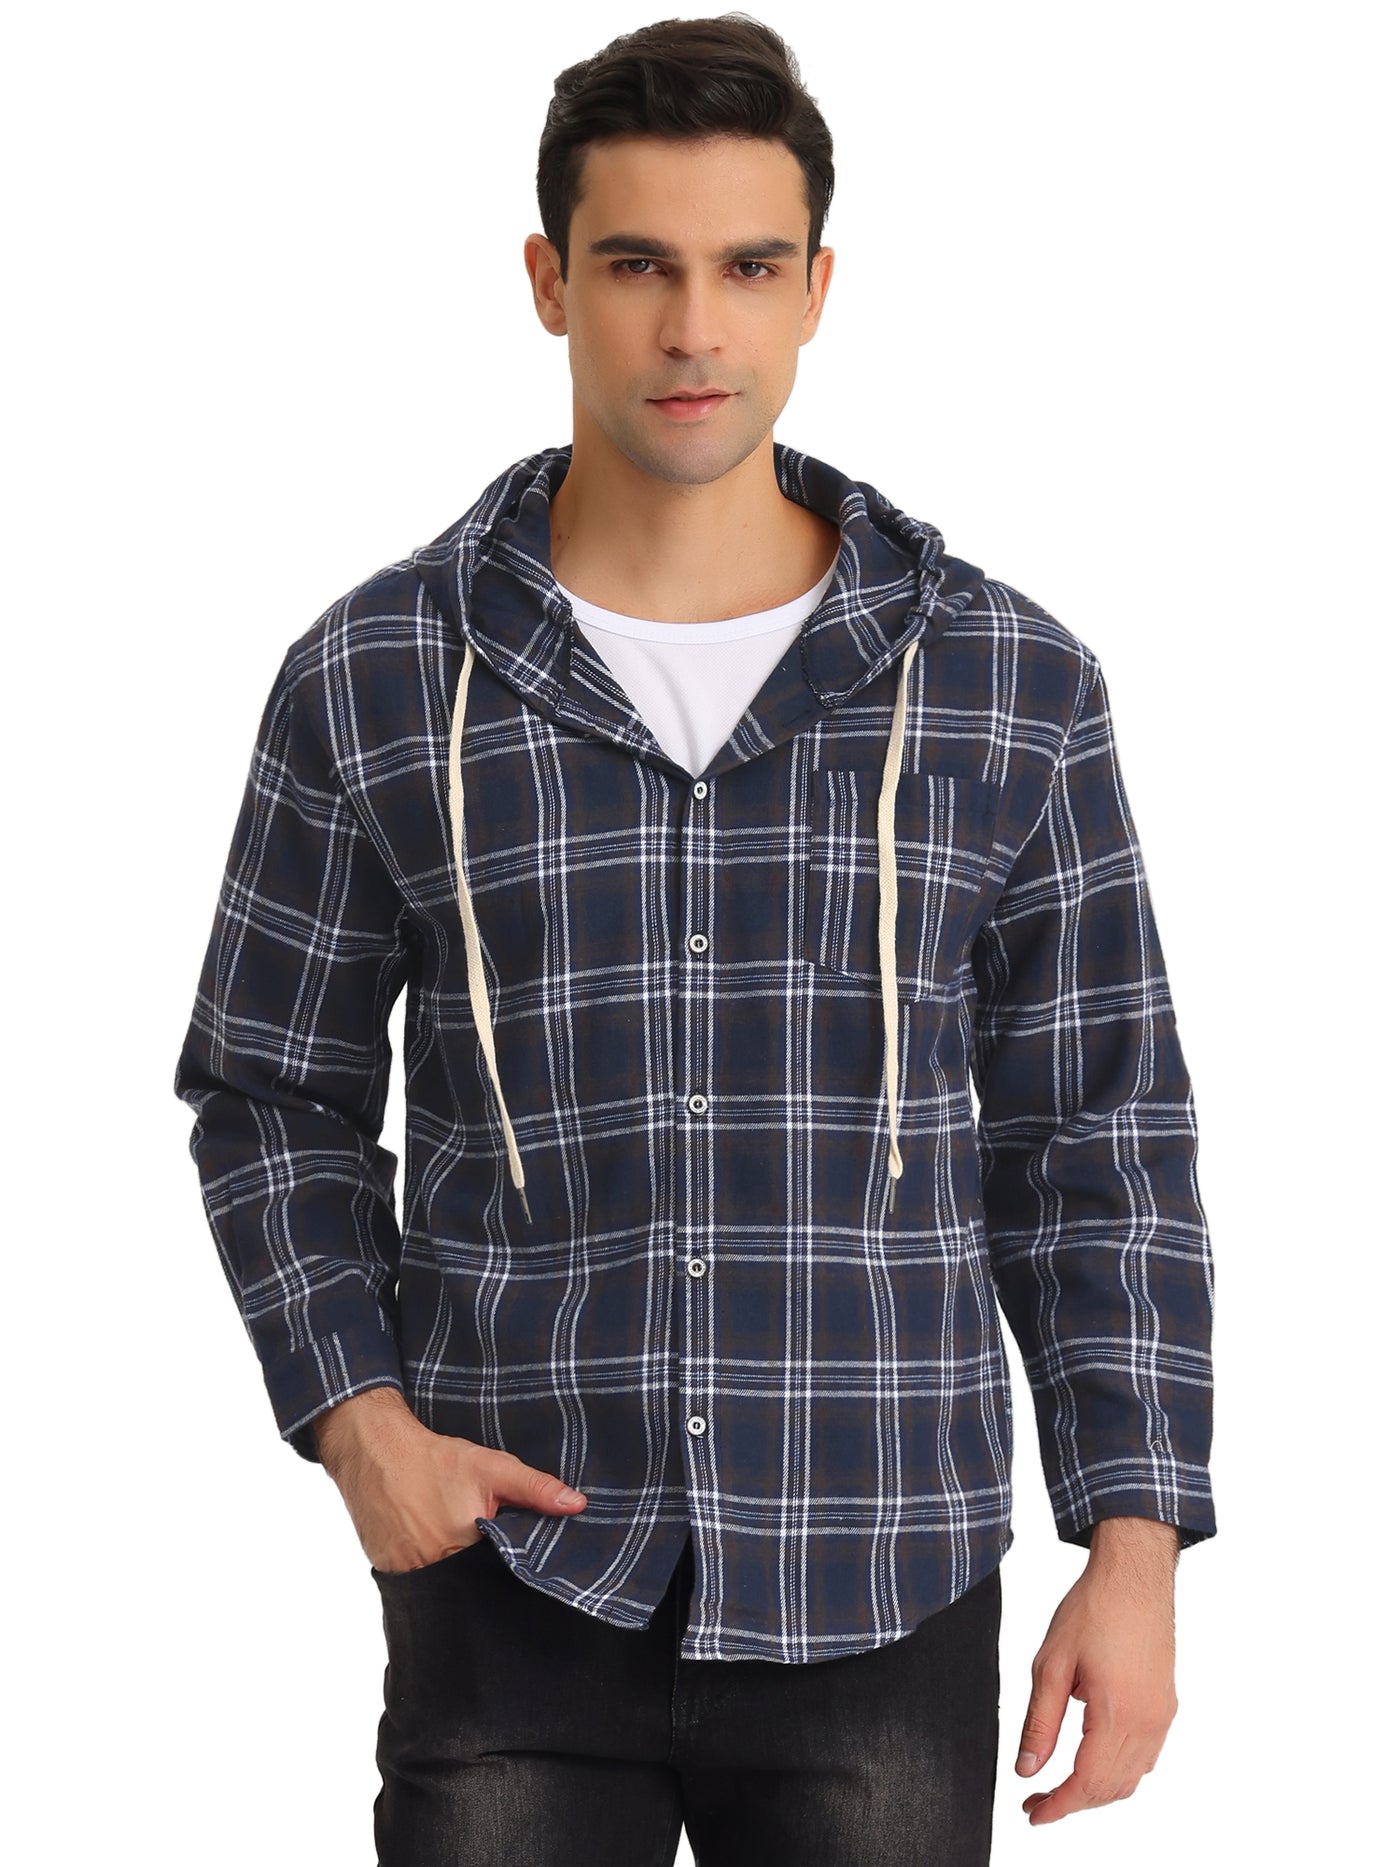 Bublédon Hoodie Plaid Long Sleeve Button Down Checked Hooded Shirt Jacket